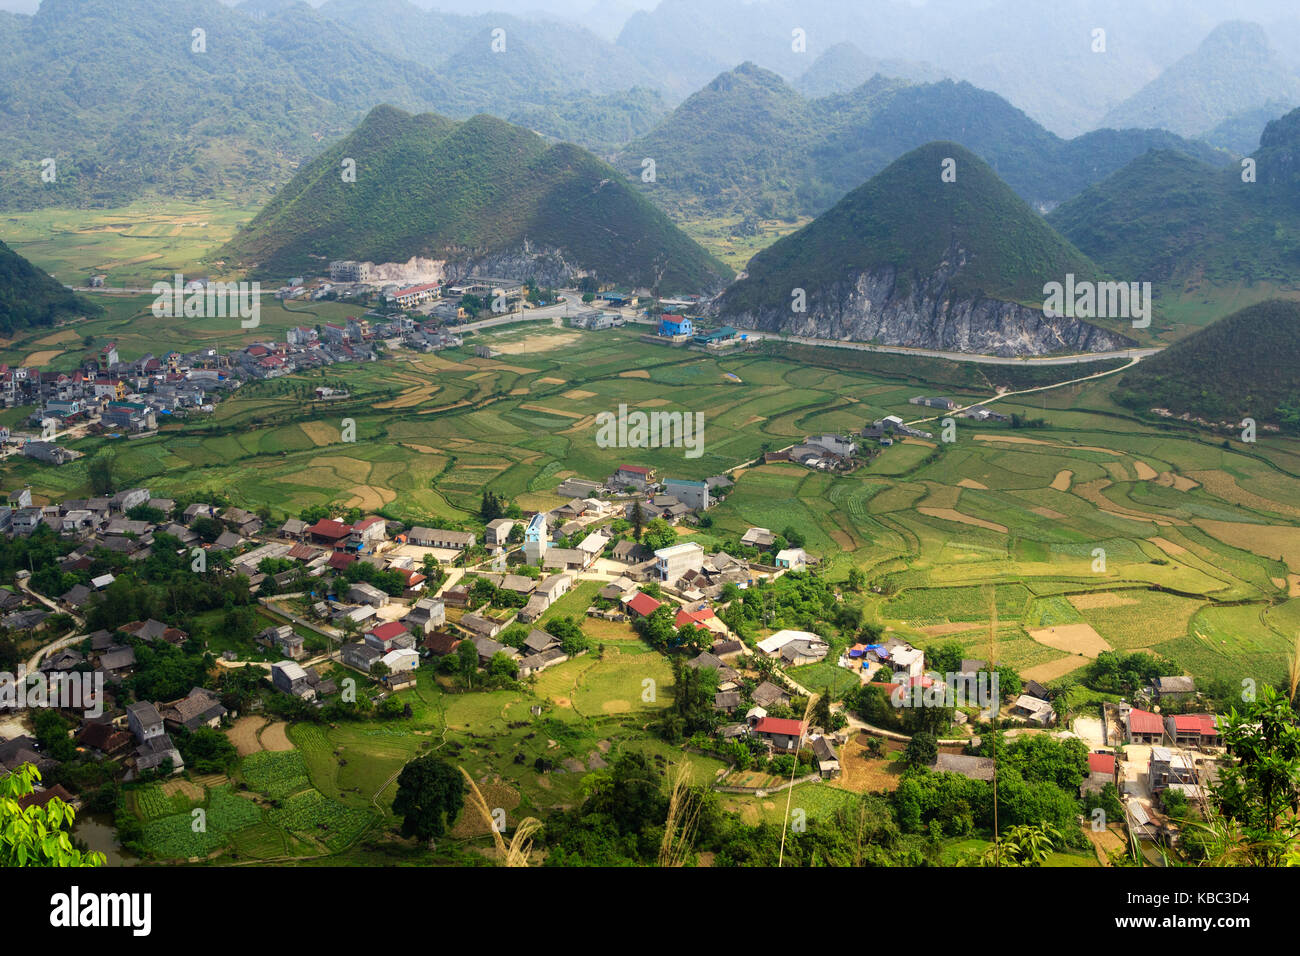 Tam Son town, Quan Ba, Ha Giang, Vietnam. Quan Ba is a rural district of Ha Giang province in the Northeast region of Vietnam. Stock Photo